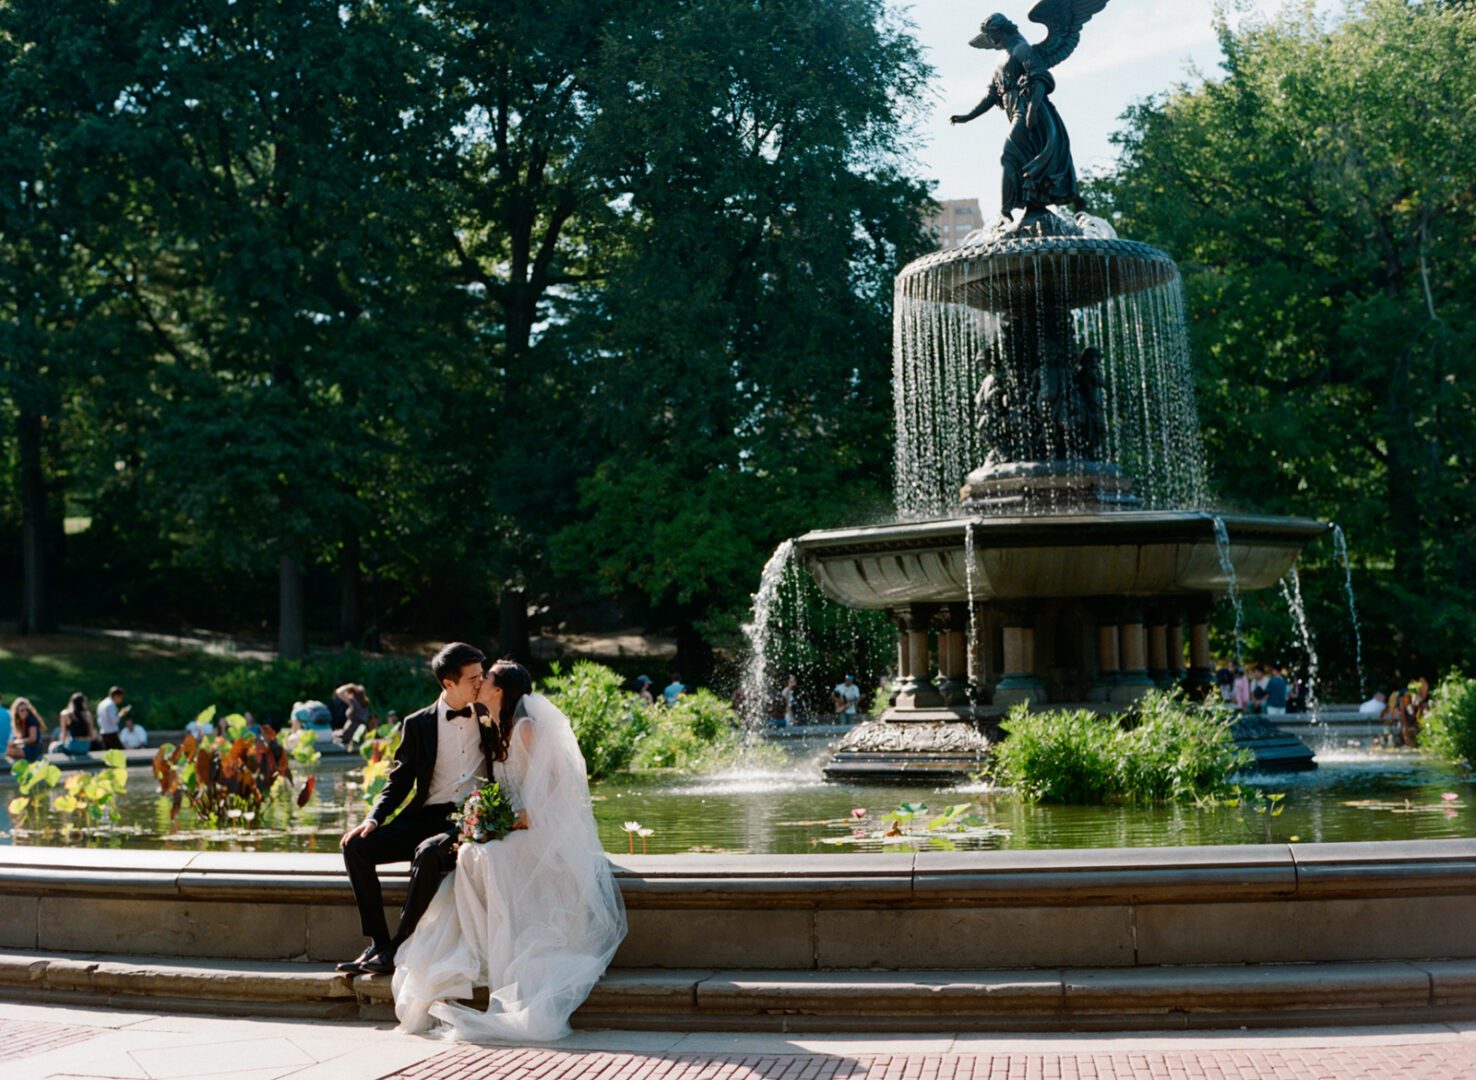 A newlywed couple standing in front of a fountain